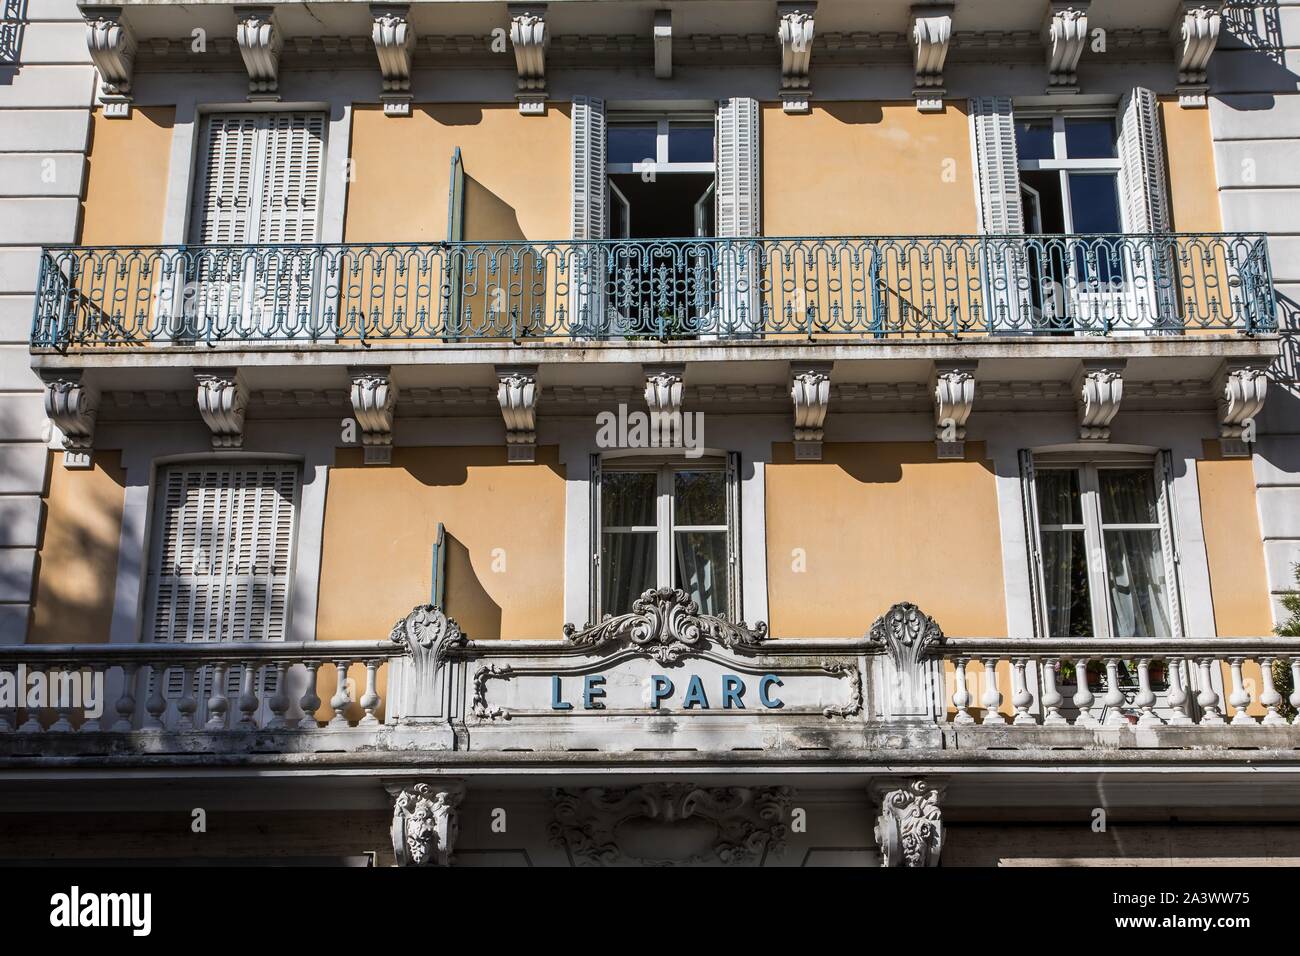 FACADE OF THE HOTEL DU PARC, SEAT OF THE VICHY GOVERNMENT FROM JULY 1940 TO AUGUST 1944, OFFICE OF MARECHAL PETAIN AND HIS PRIME MINISTER PIERRE LAVAL DURING THE SECOND WORLD WAR, COLLABORATION, VICHY, ALLIER, AUVERGNE-RHONE-ALPES REGION, FRANCE Stock Photo